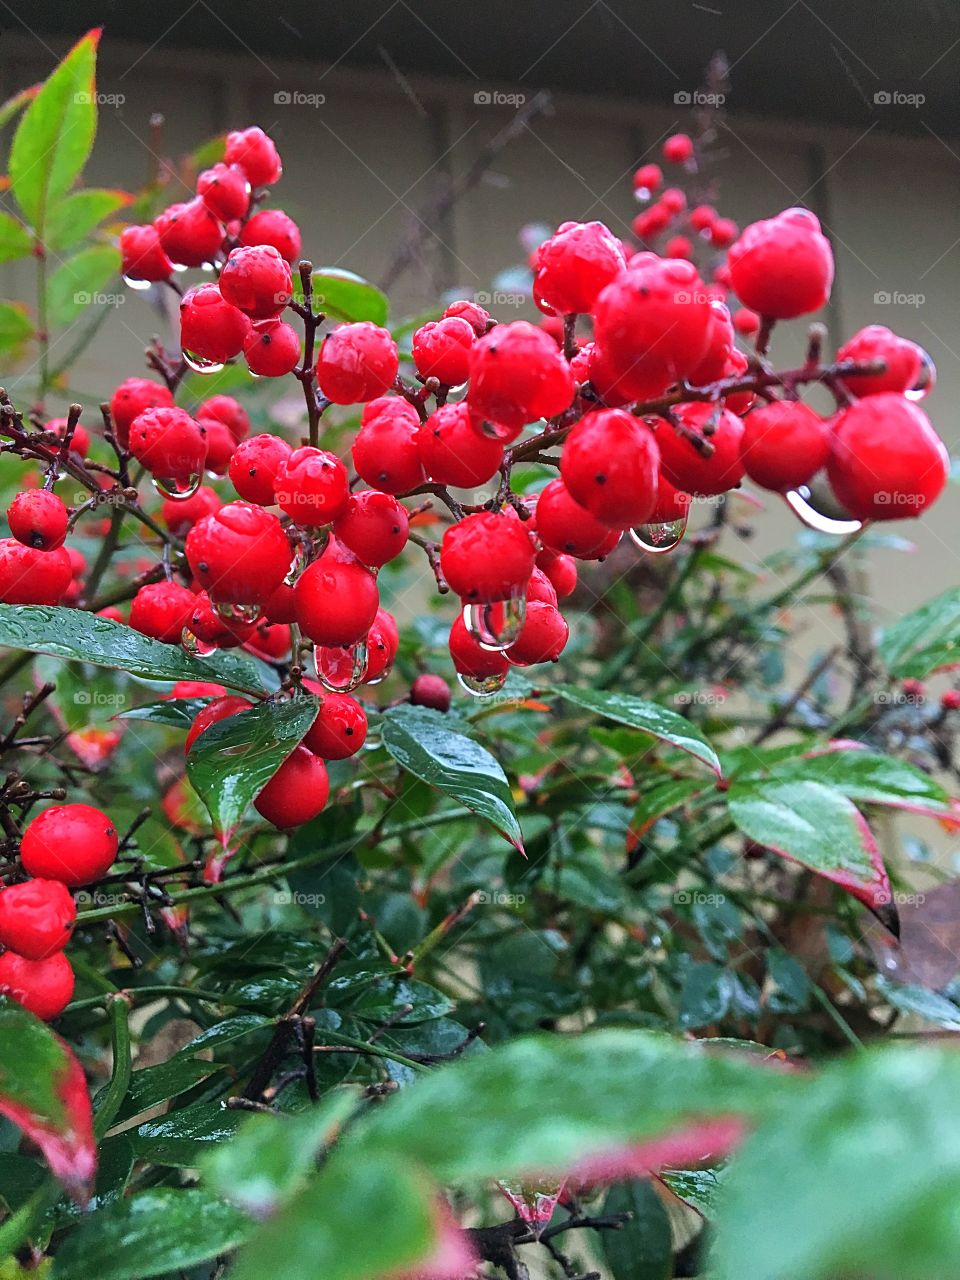 captured the rain drops on these berries.